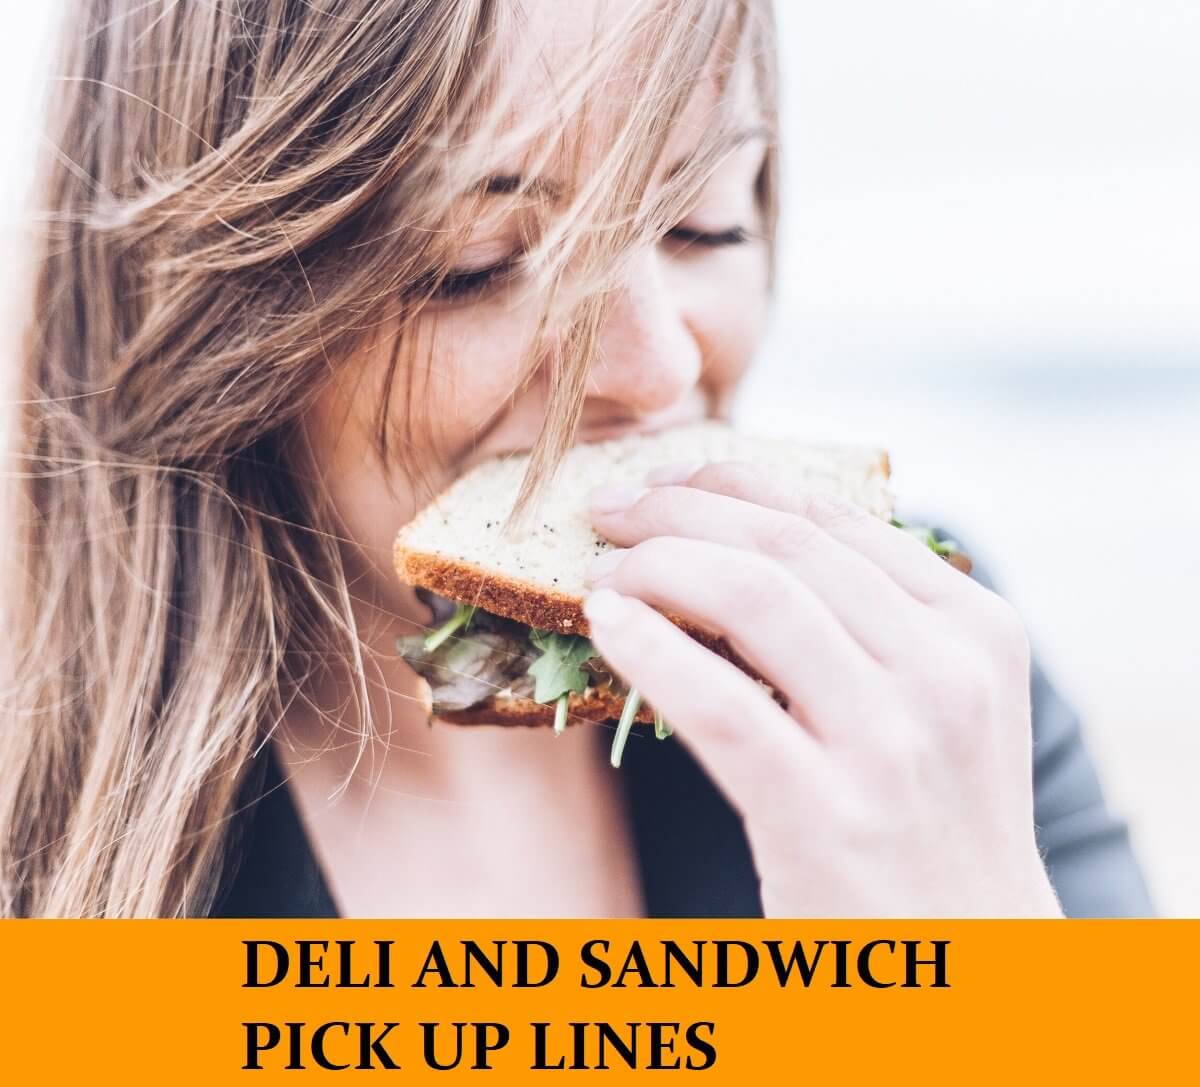 Pick Up Lines About Sandwich and Deli